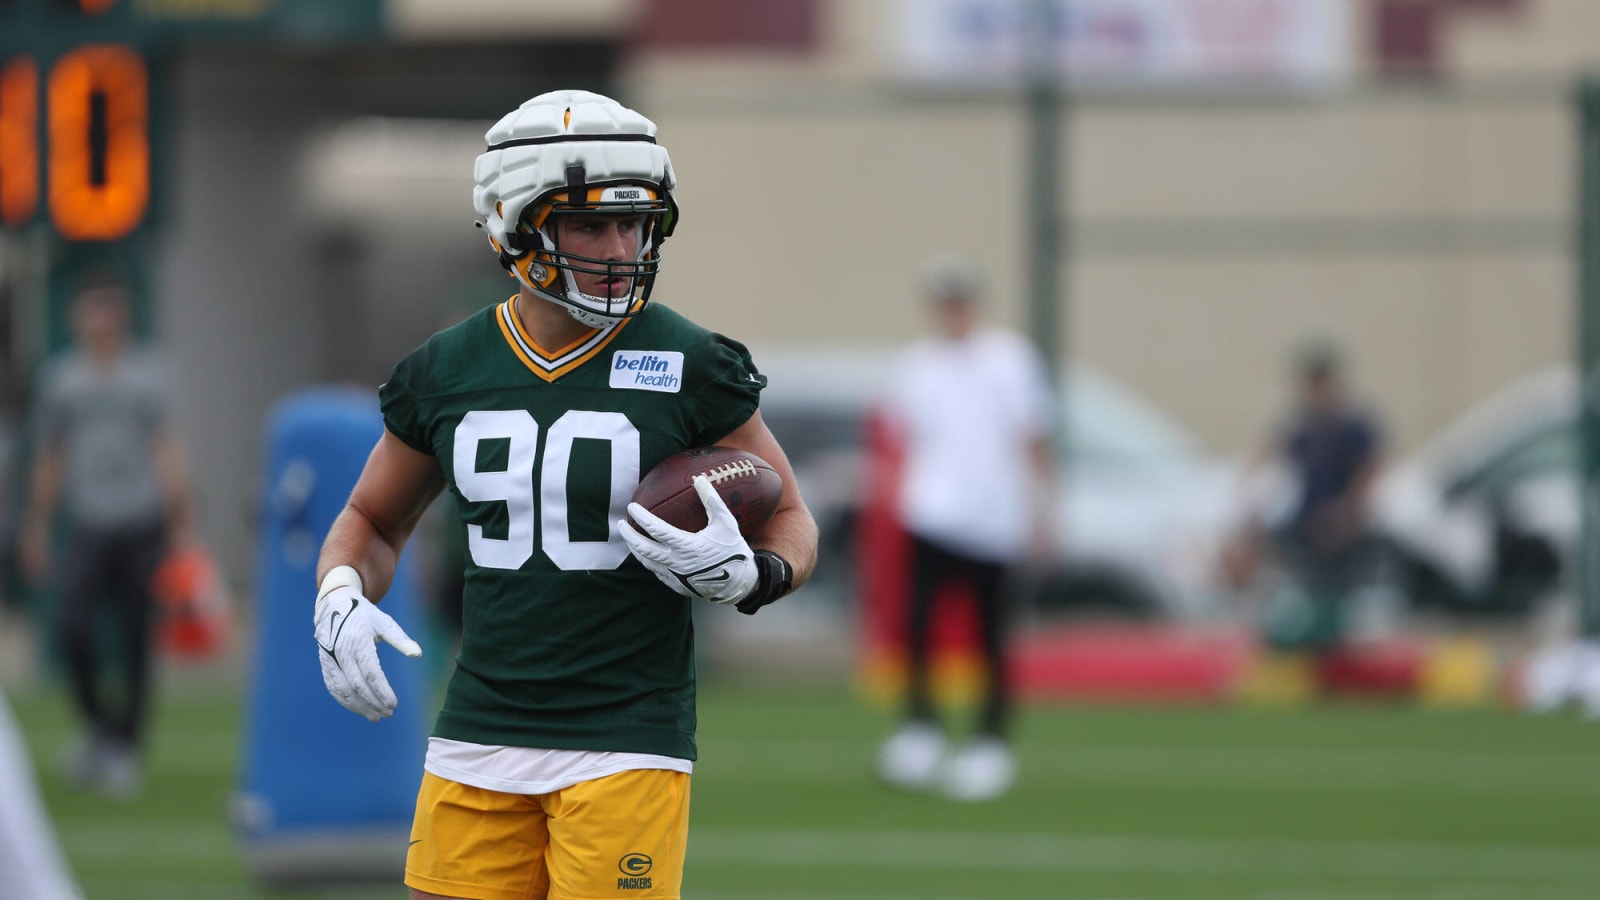 Packers First Round Pick Lukas Van Ness Shows Potential in First Two NFL Games